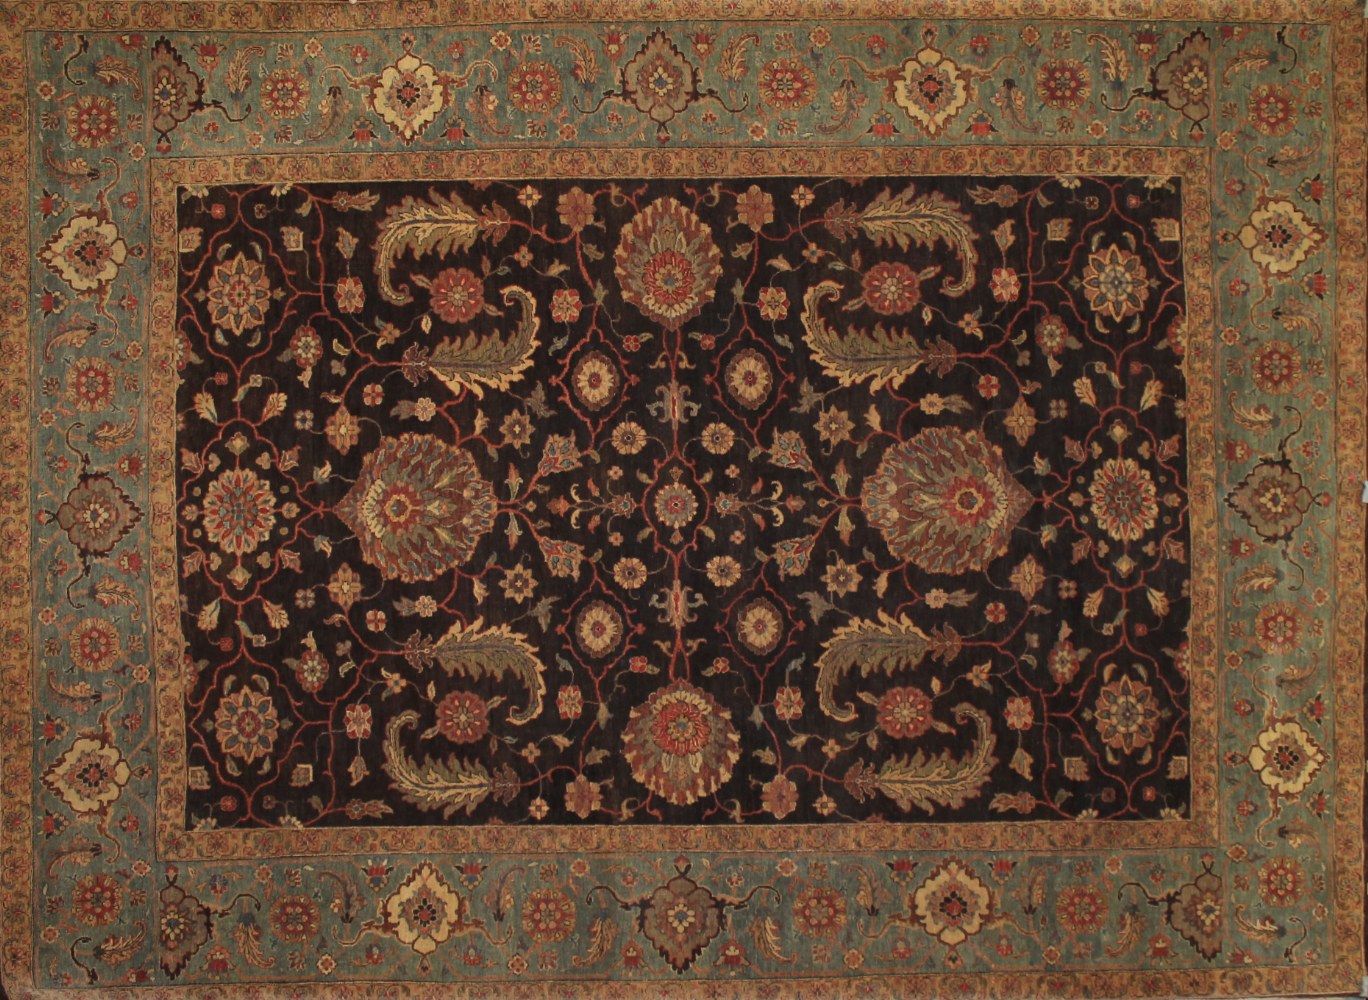 9x12 Antique Revival Hand Knotted Wool Area Rug - MR14307